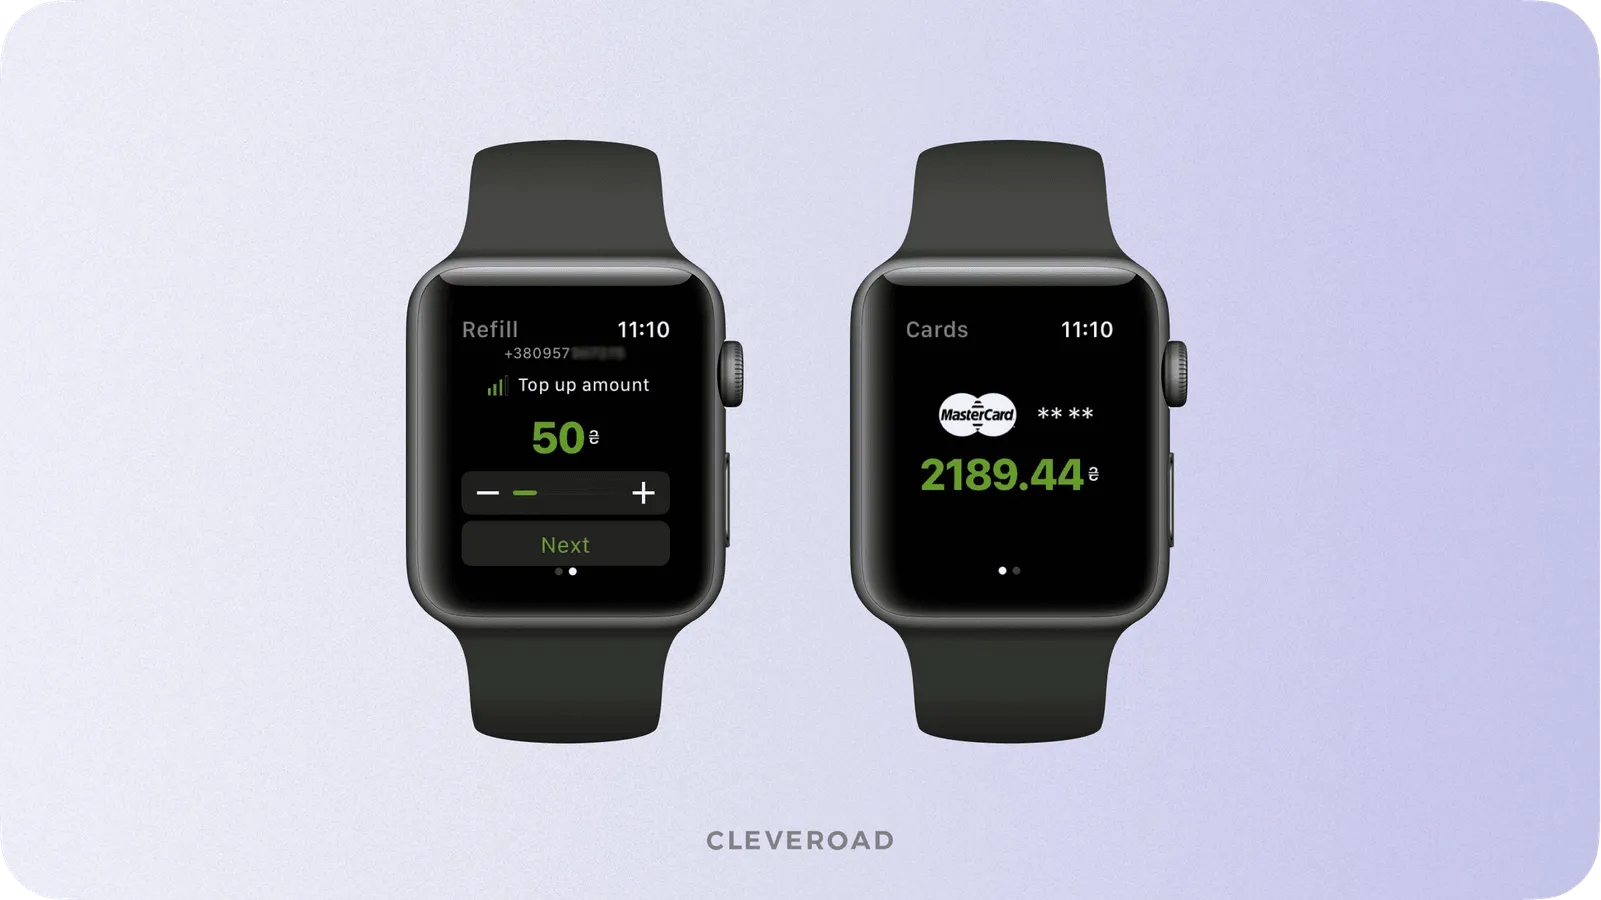 How a banking app may look like on smartwatches